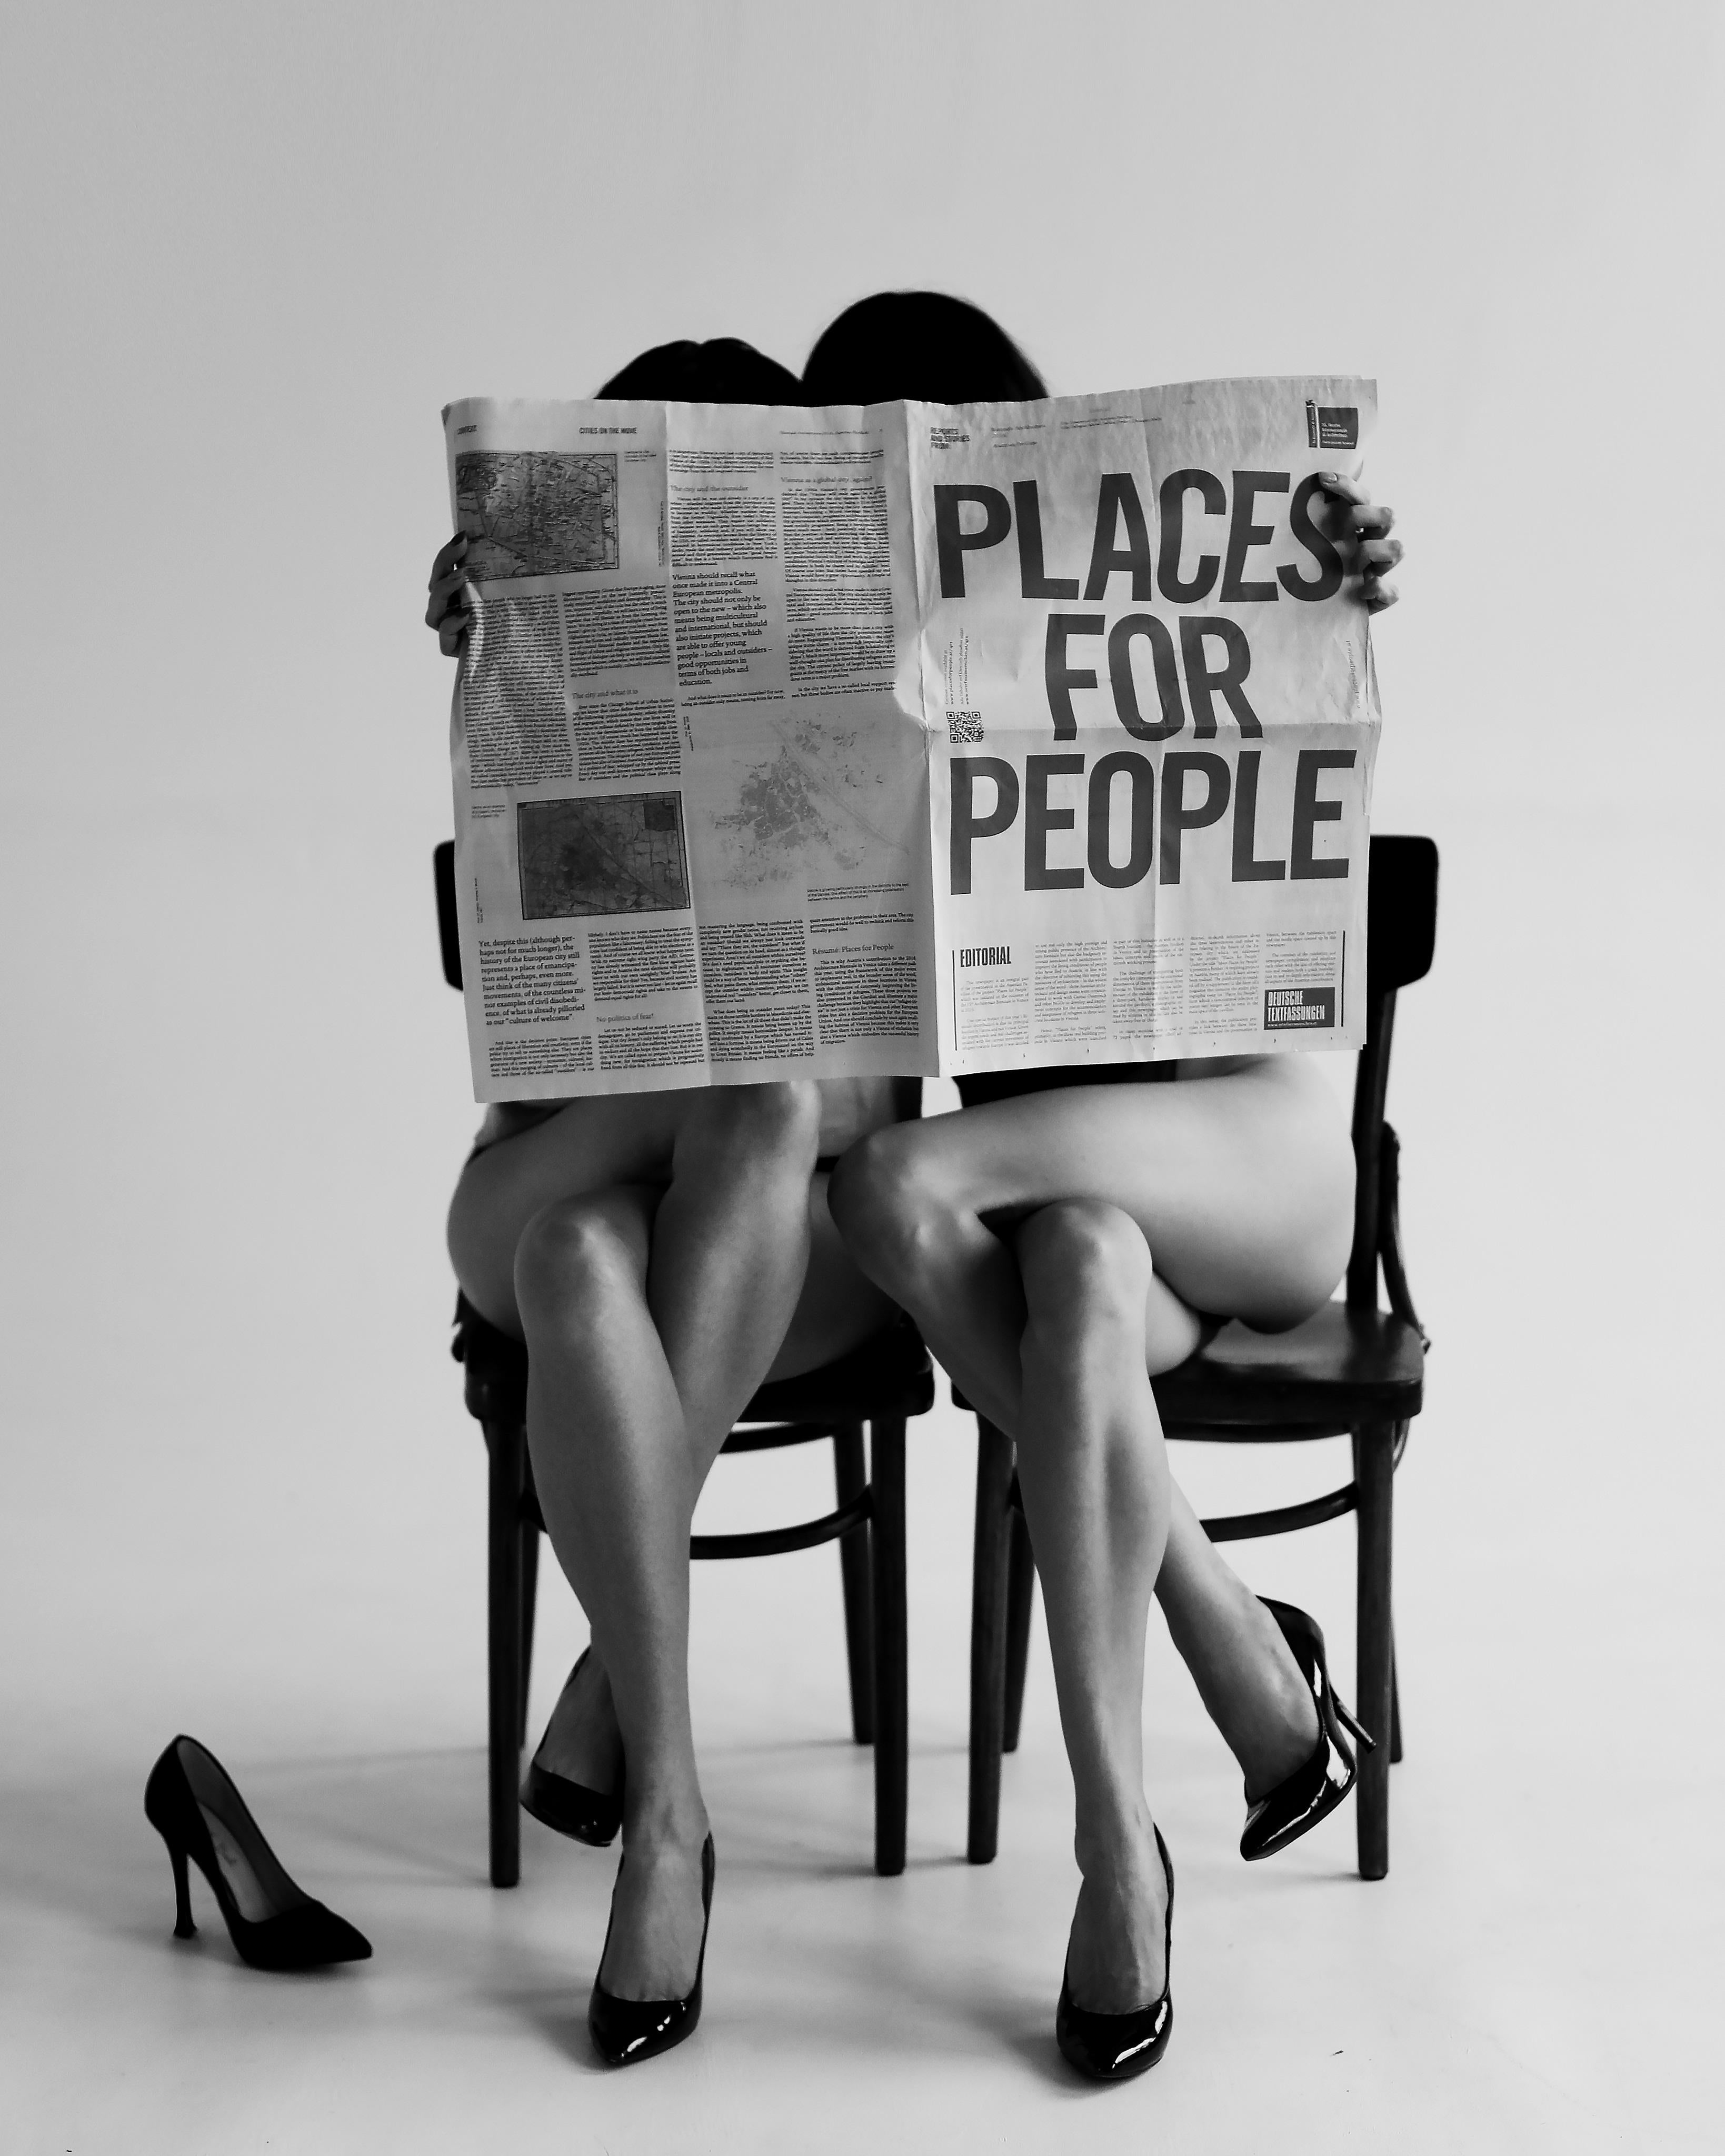 "Place for People" Photography 27.5" x 24" inch Edition 4/15 by Olha Stepanian

Printed on Epson Professional Paper
Signed and numbered by the artist 

Not framed. Ships in a tube. 


Olha Stepanian was born and raised in Ukraine, where she